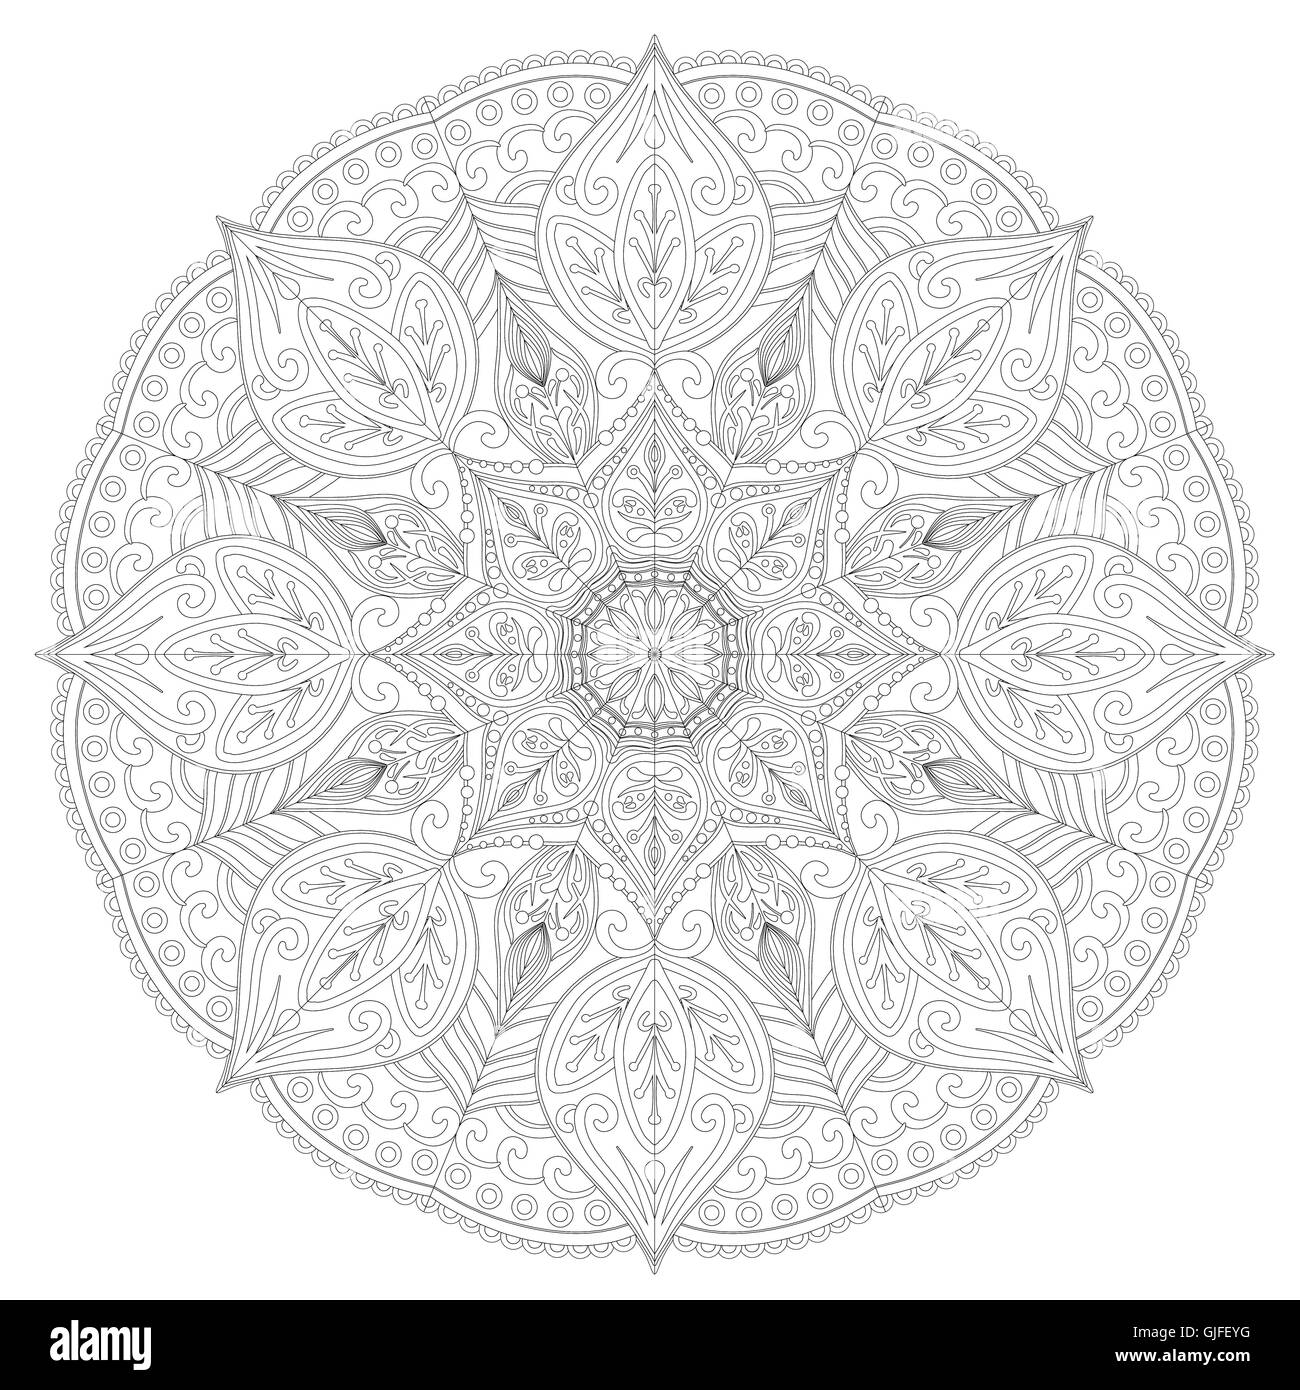 Coloring book for adults. Page coloring book. Zentangle and doodling ornament. Round lace pattern. Stock Vector